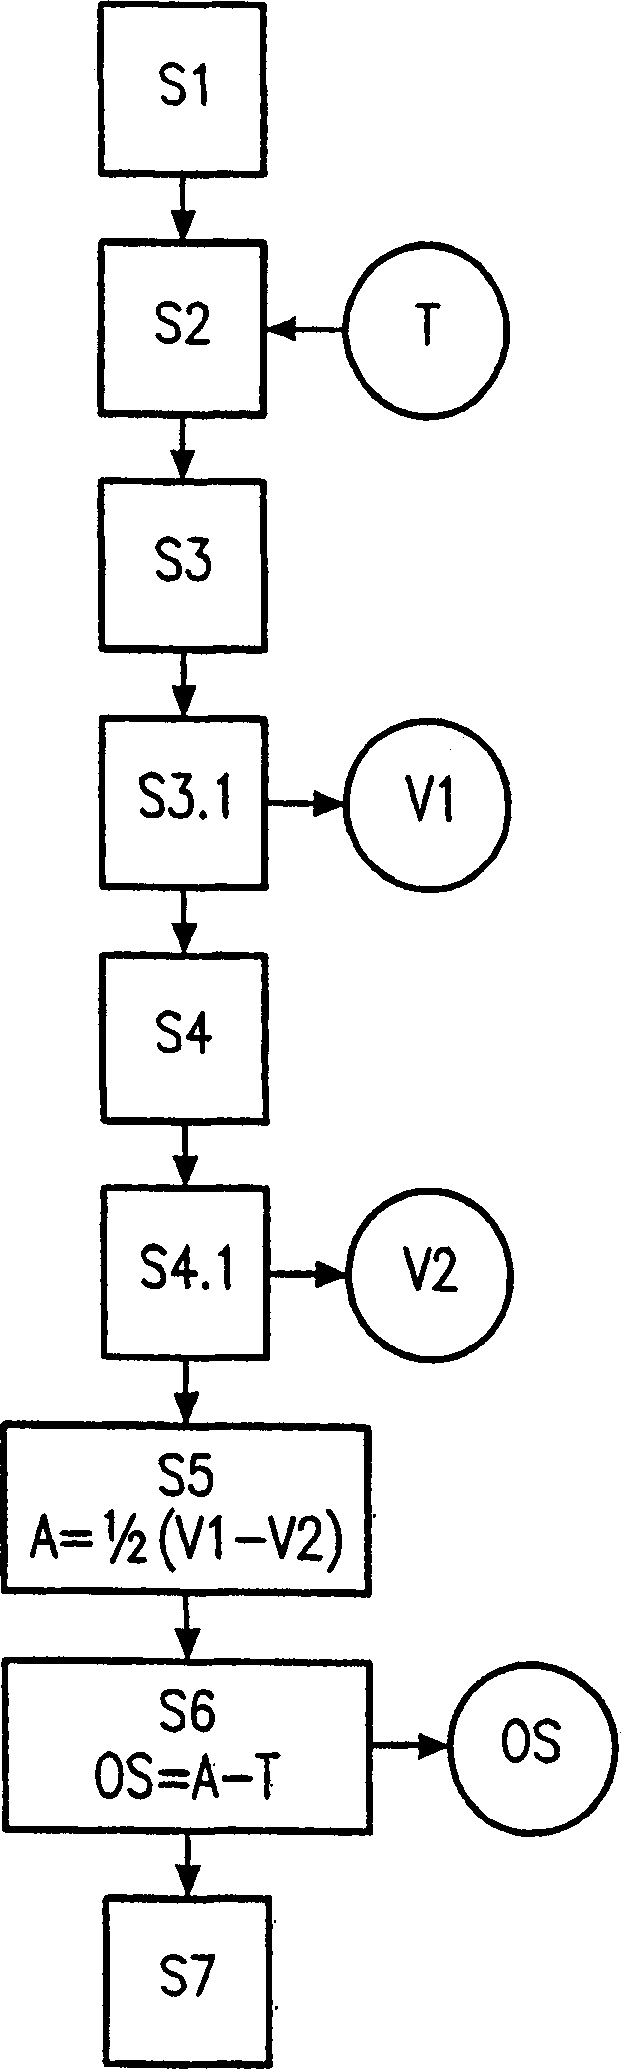 Determination of differential offset in radio device